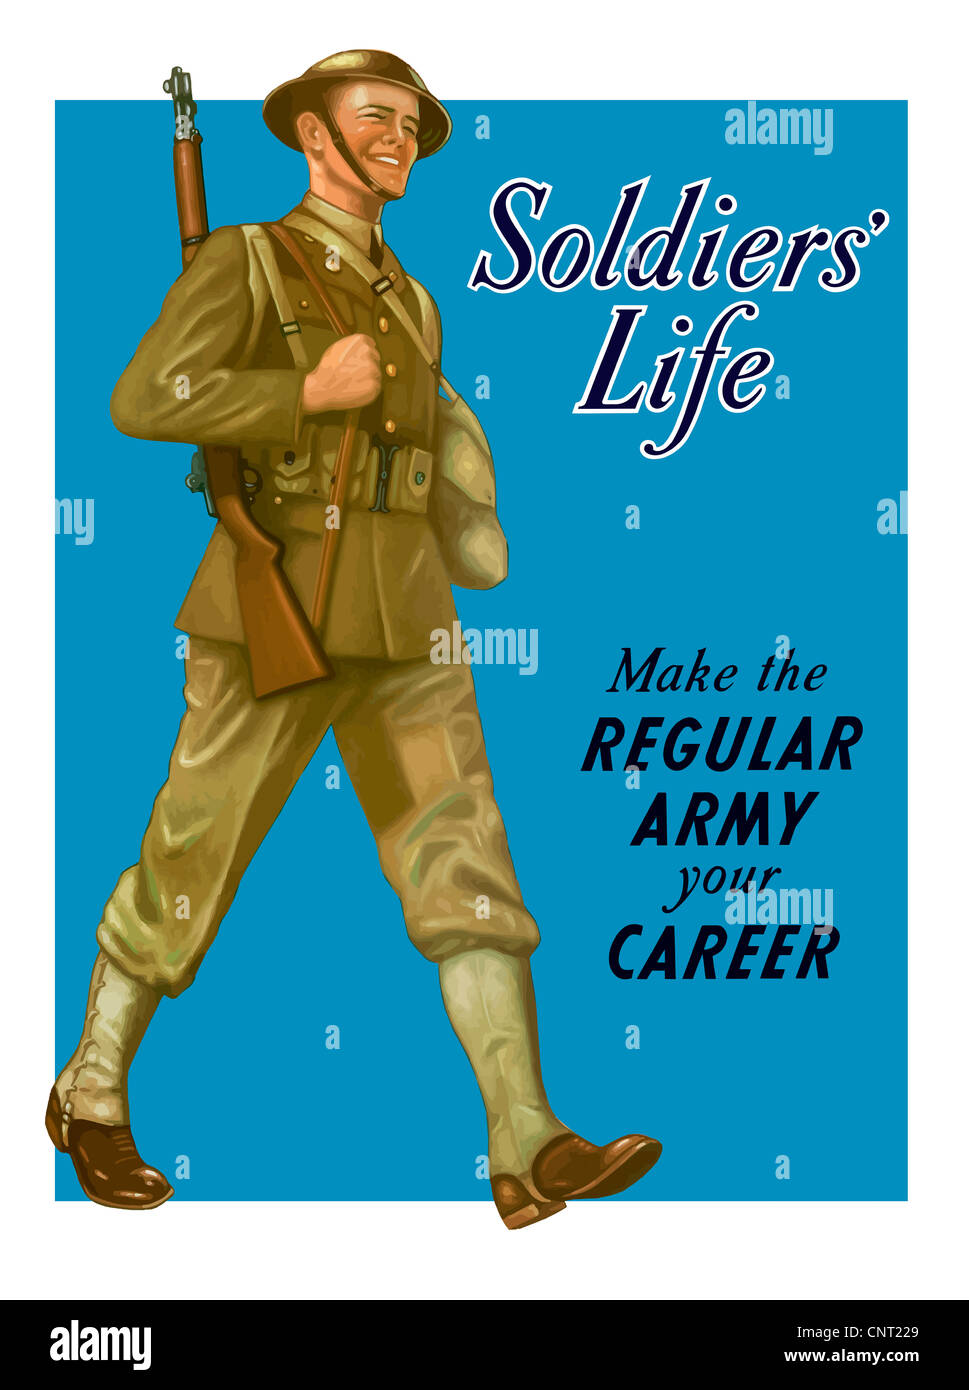 This vintage World War II poster features a smiling soldier marching along with his rifle. Stock Photo